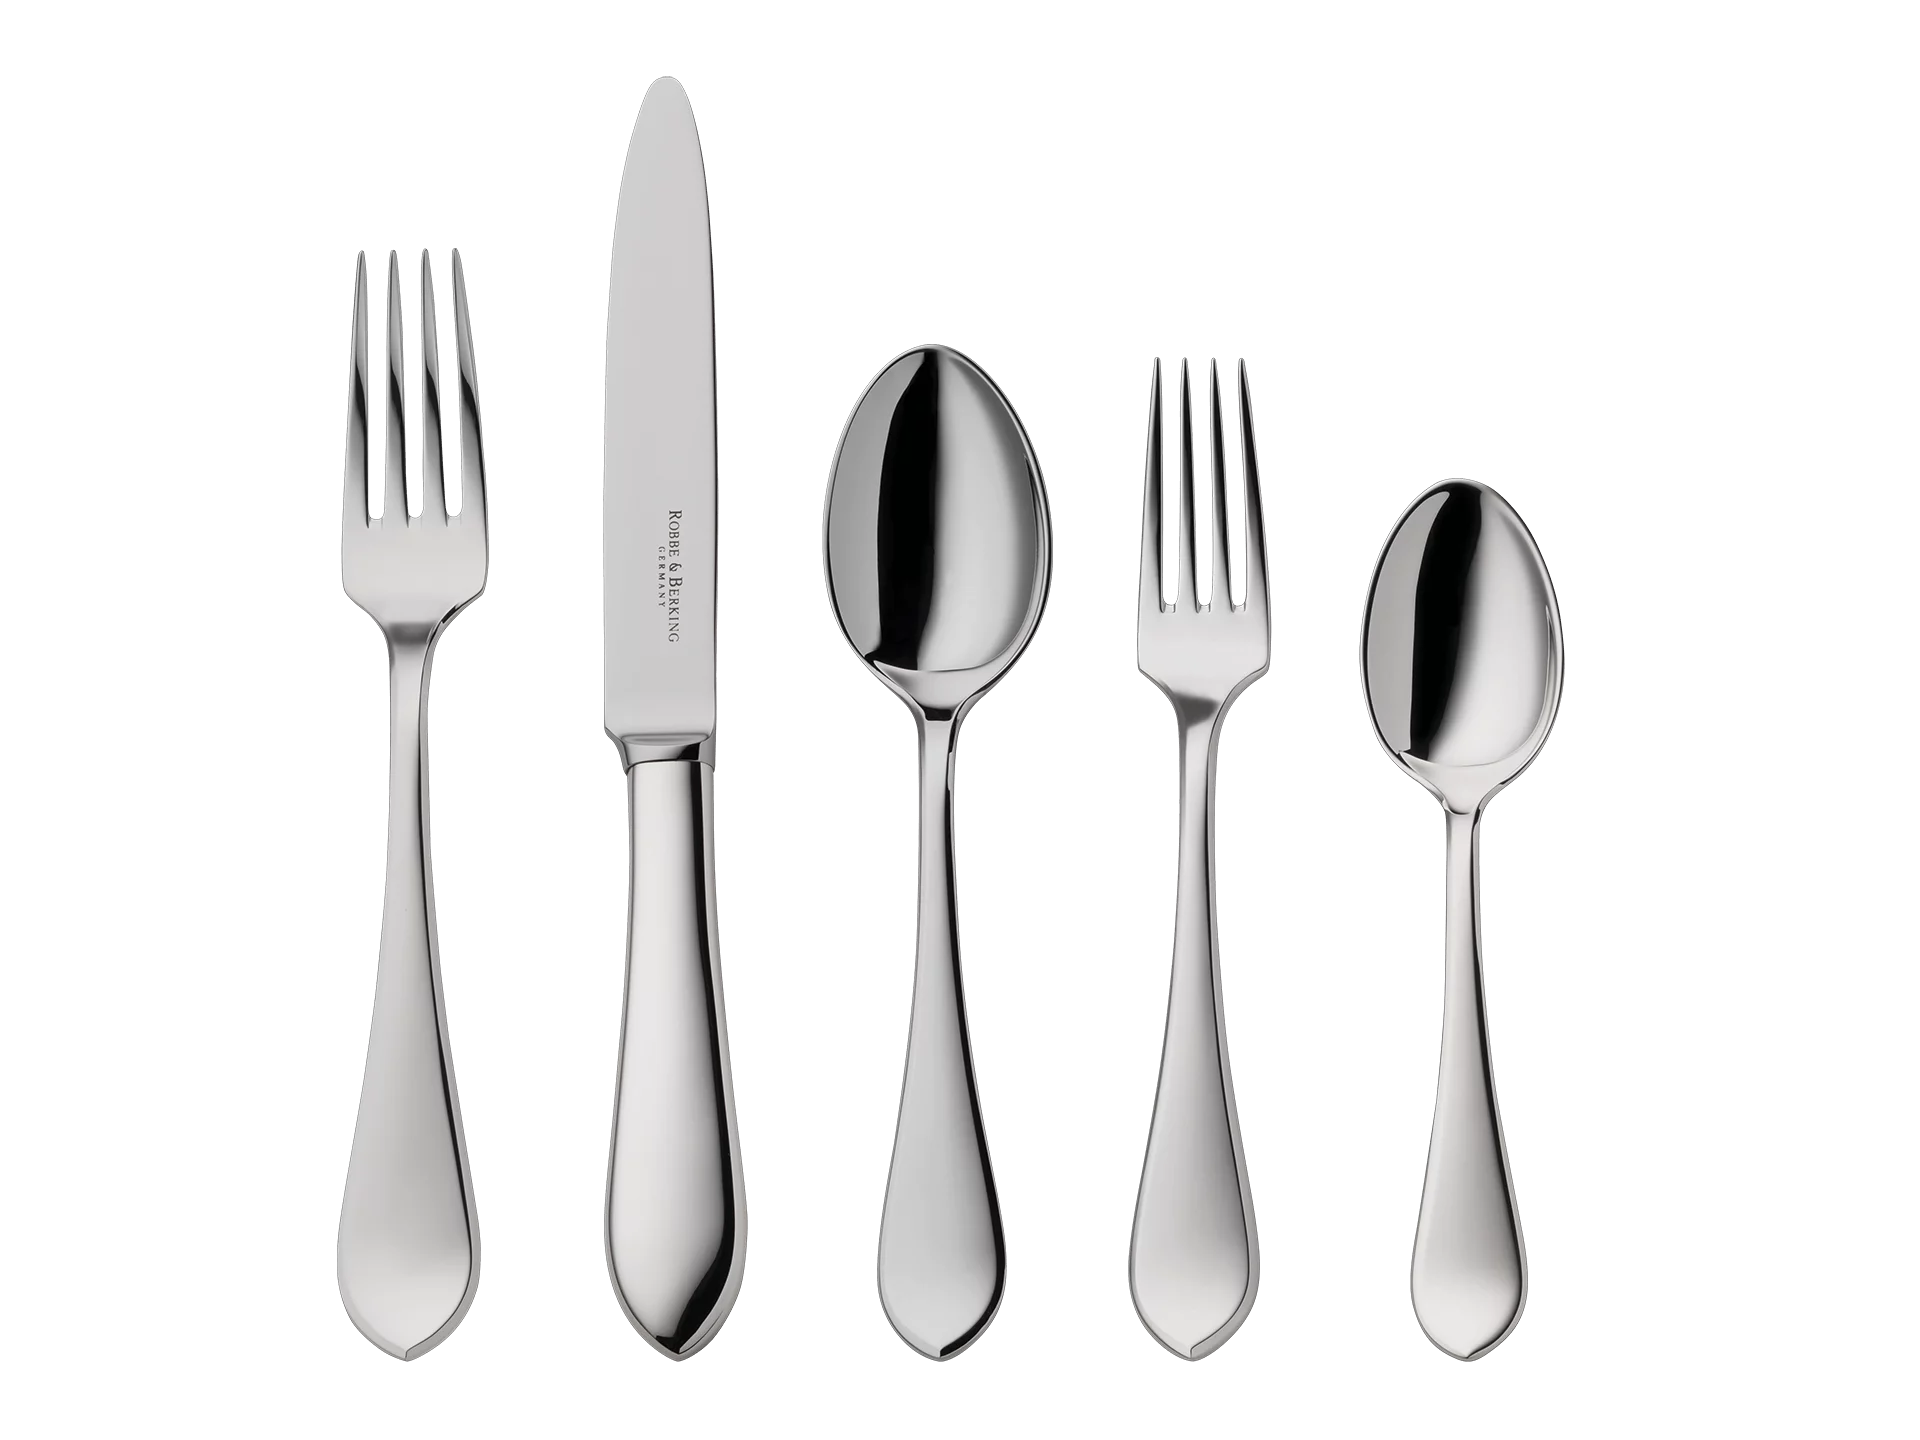 Eclipse 5-piece place setting (150g massive silverplated)